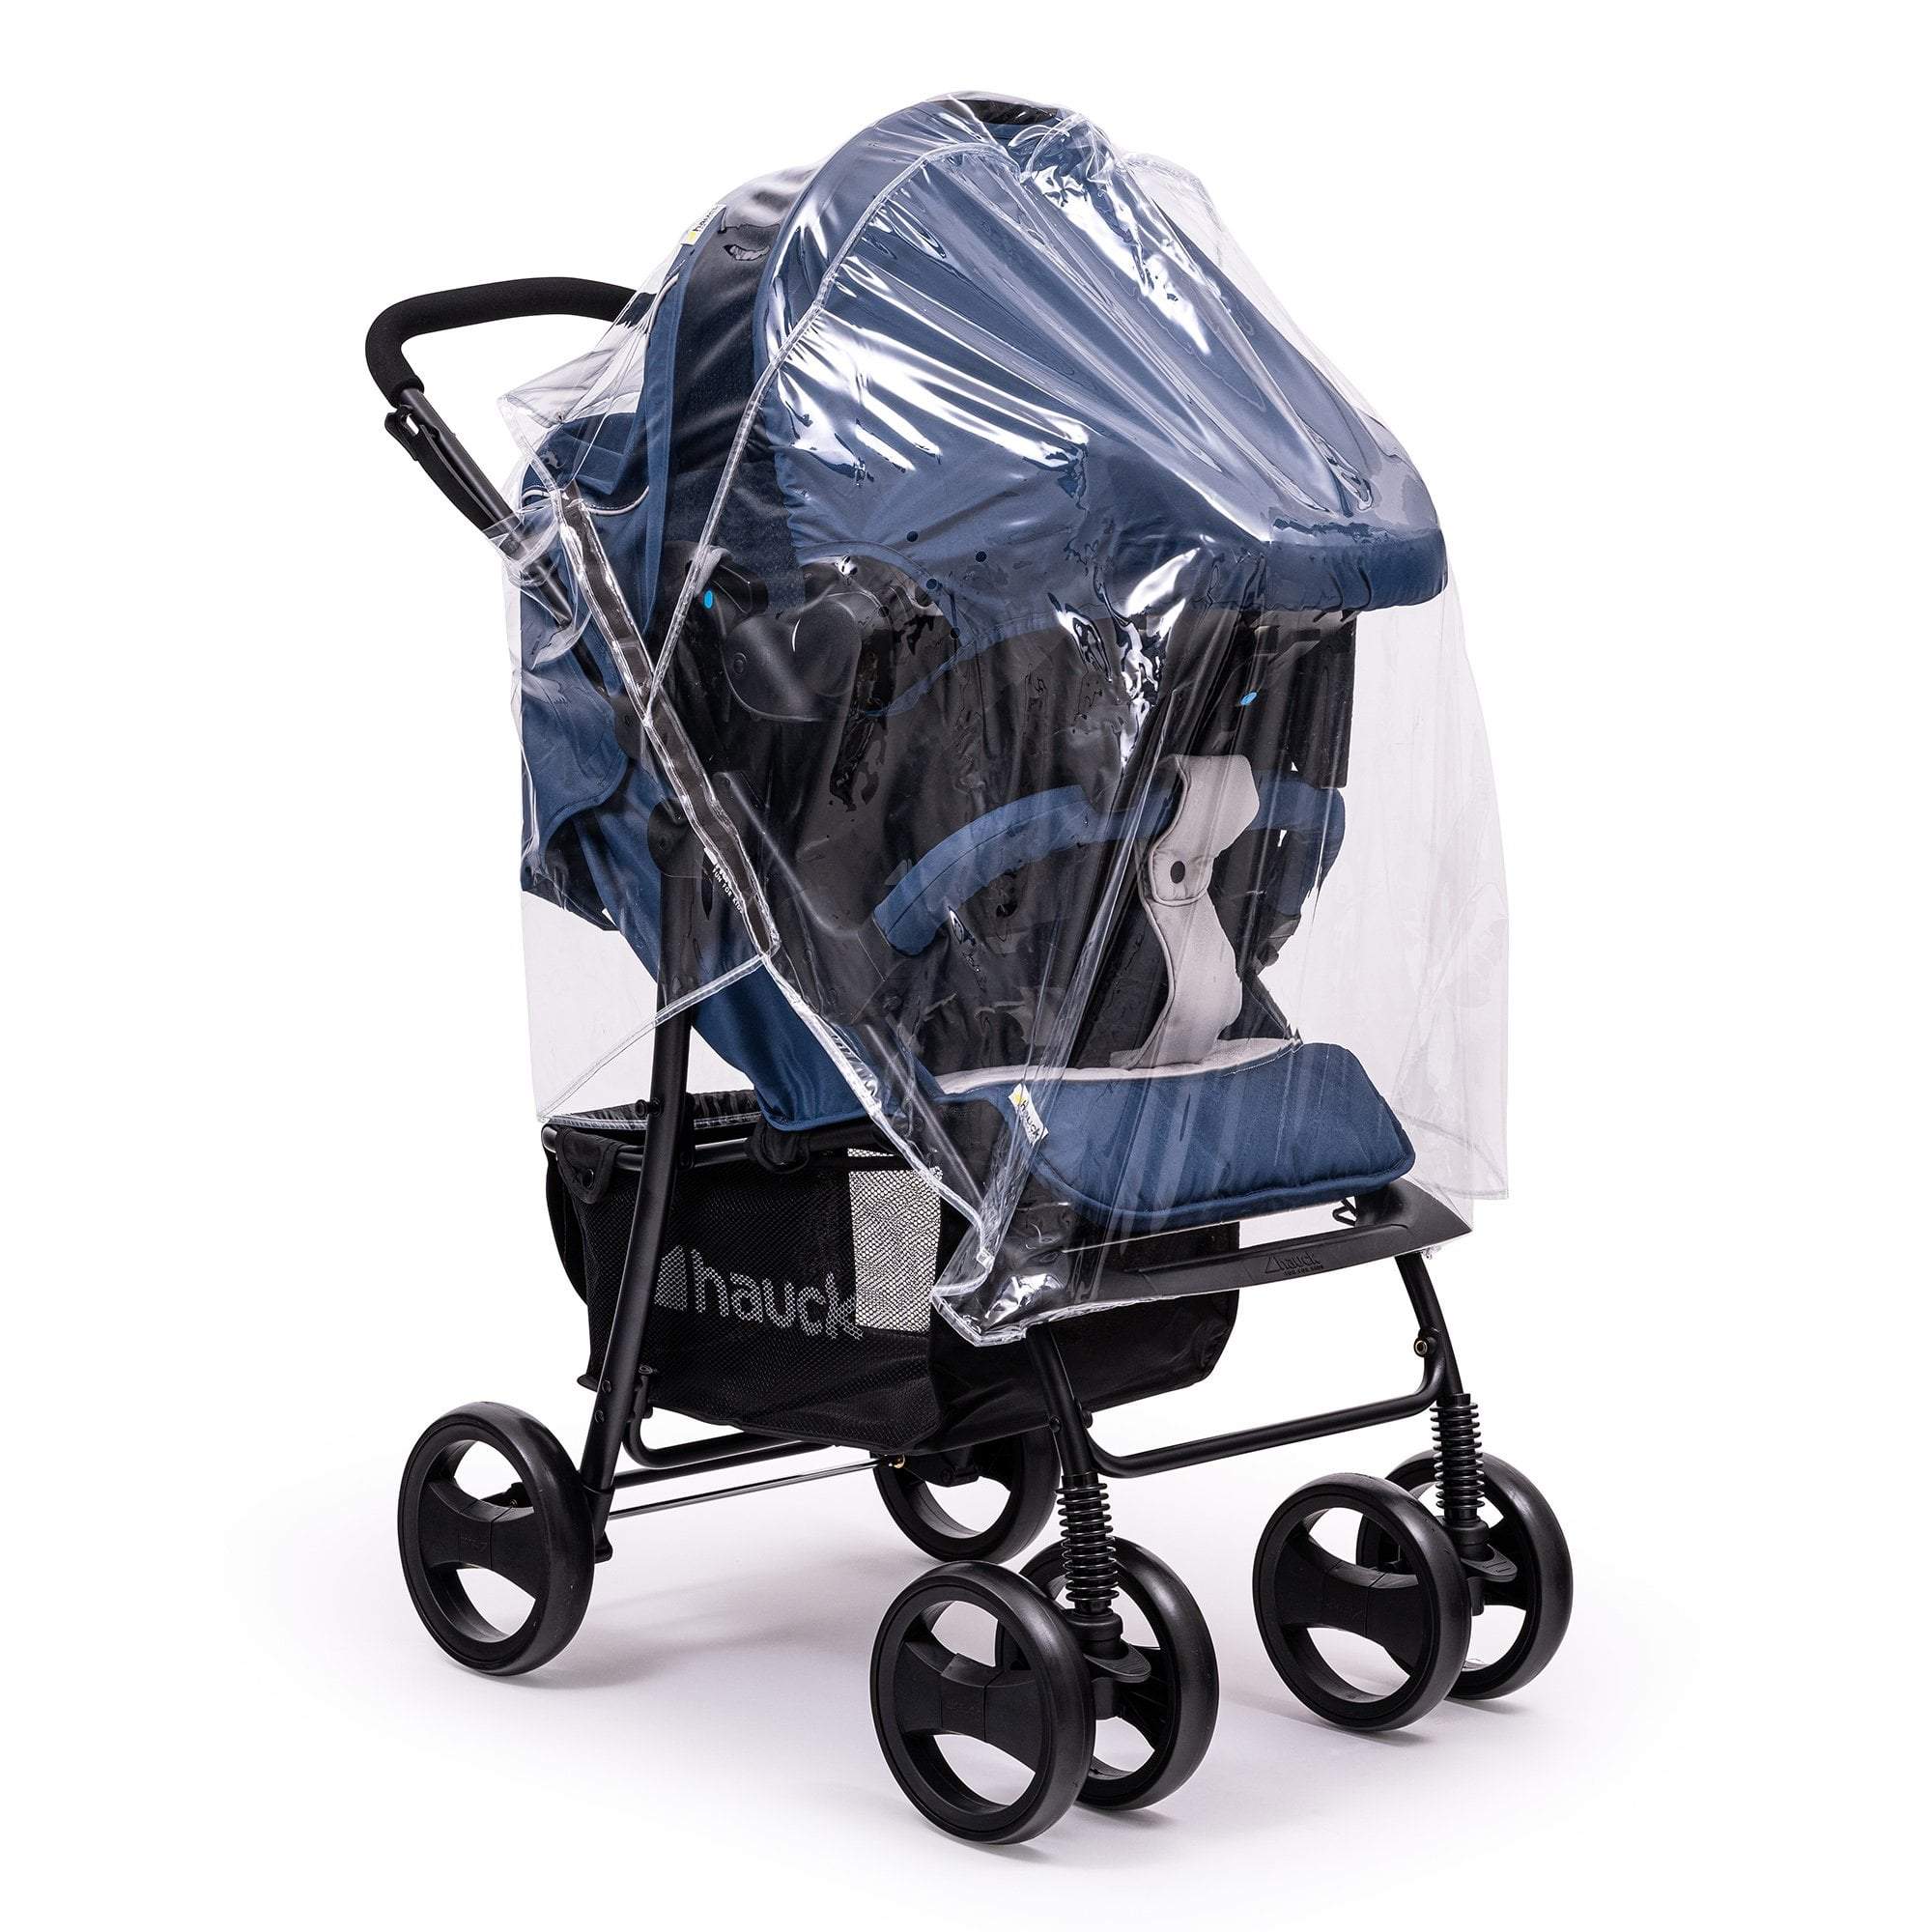 Travel System Raincover Compatible with Peg Perego - Fits All Models - For Your Little One